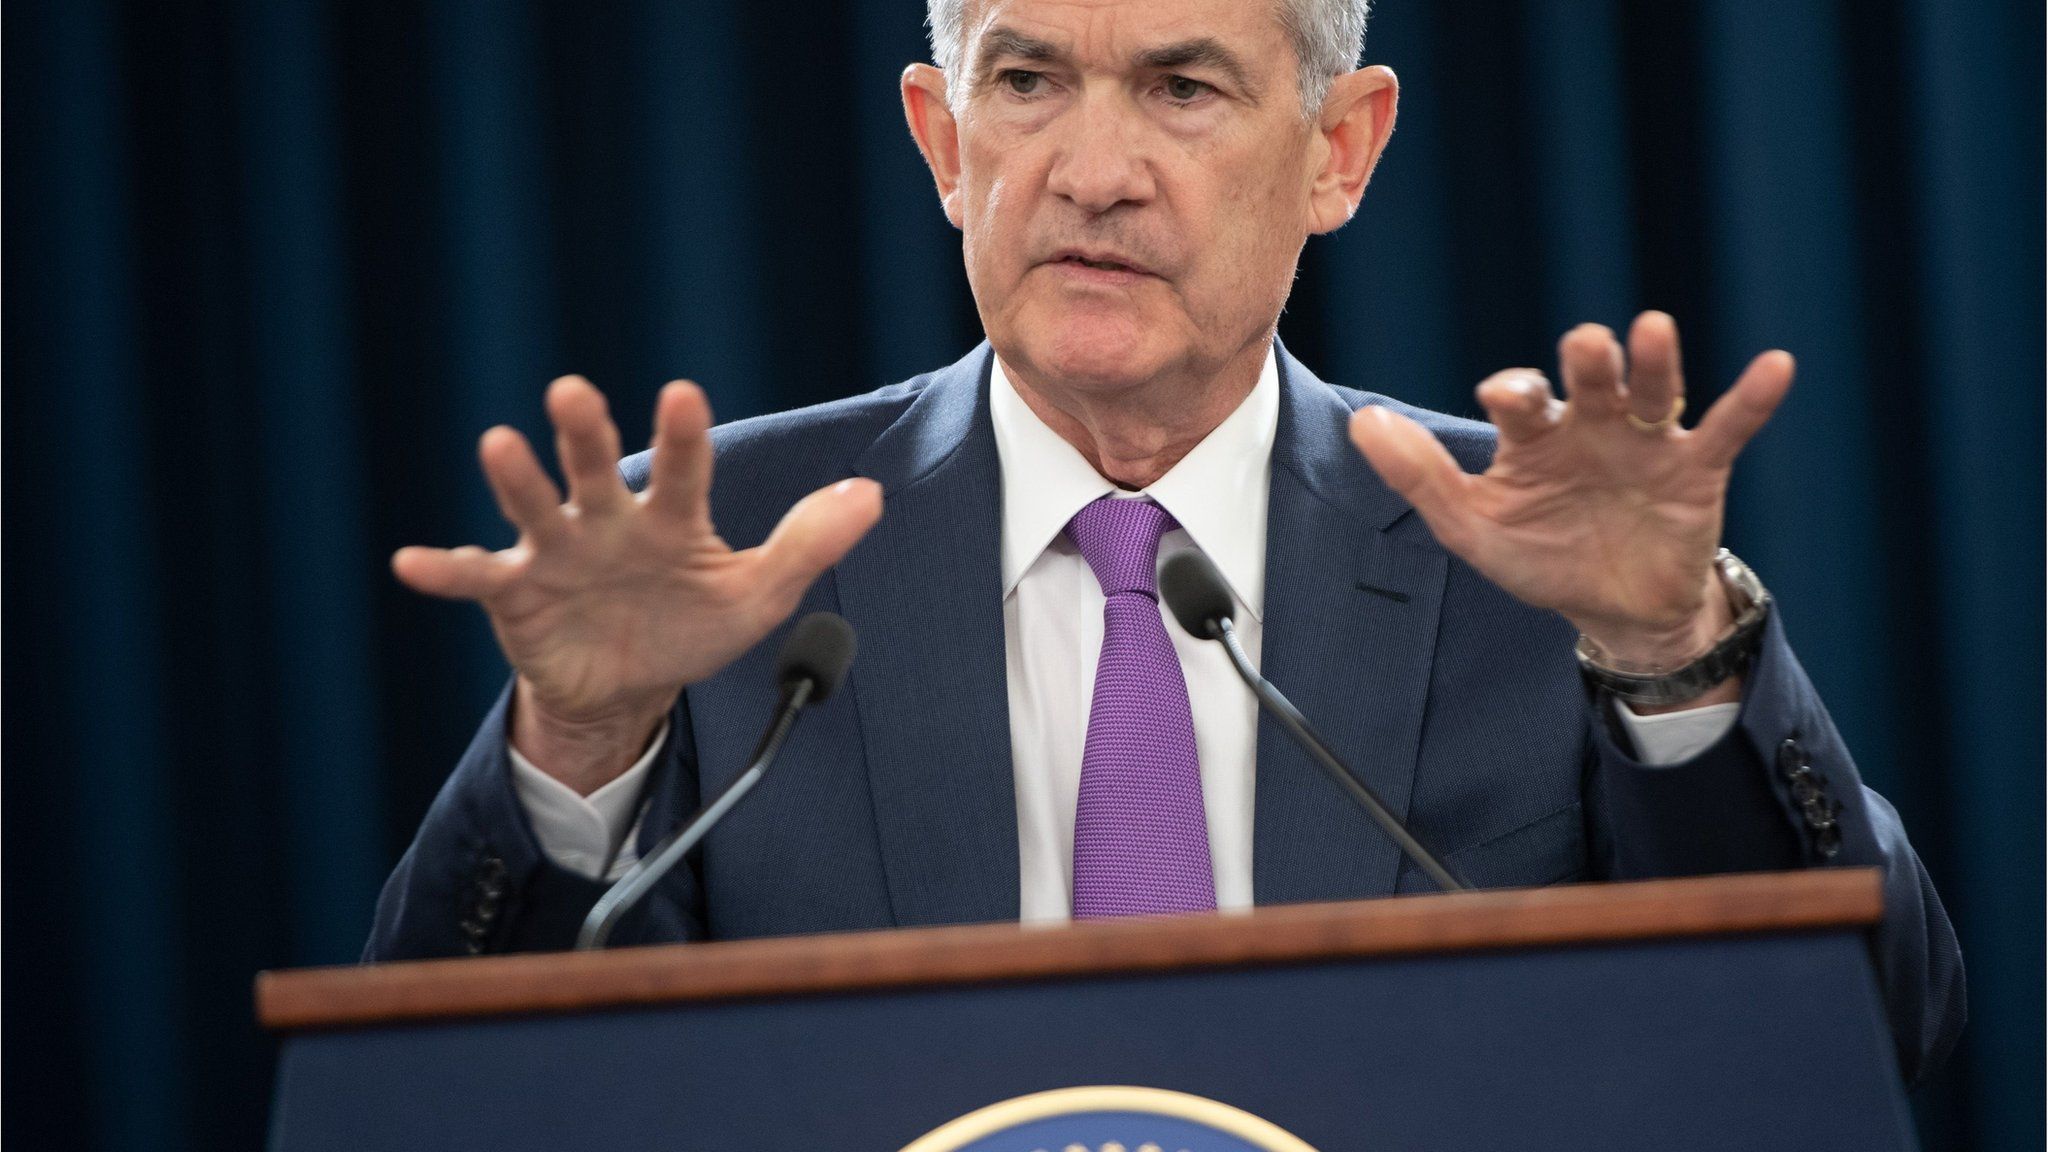 Federal Reserve Board Chairman Jerome Powell speaks during a press conference in Washington, DC, September 26, 2018.